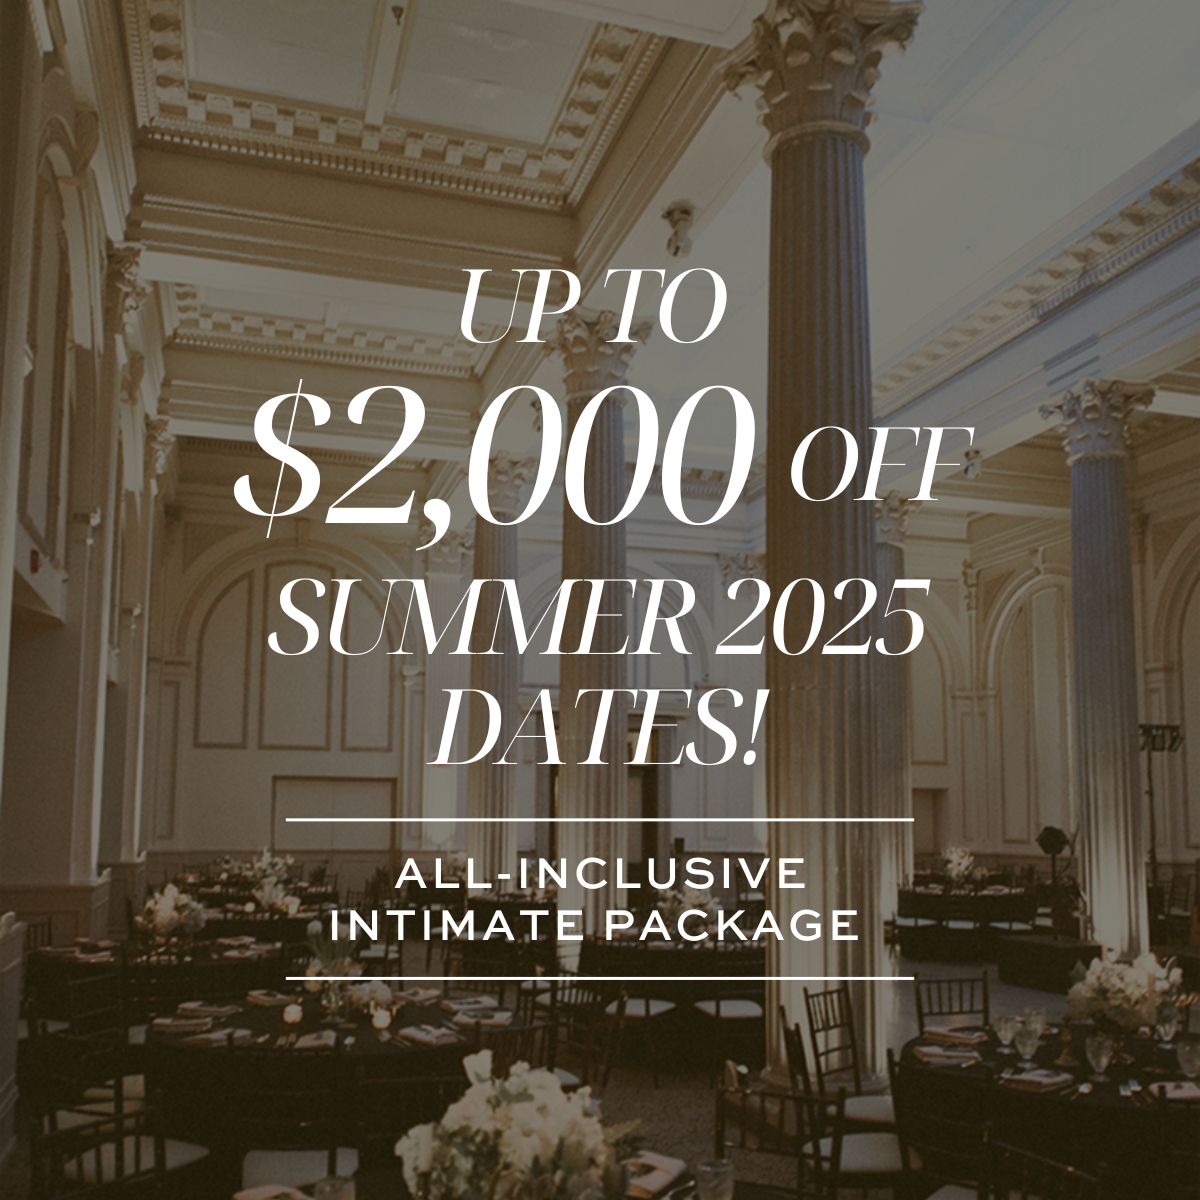 Special Offer on our Intimate Wedding Package for Summer 2025 Dates Featured Image